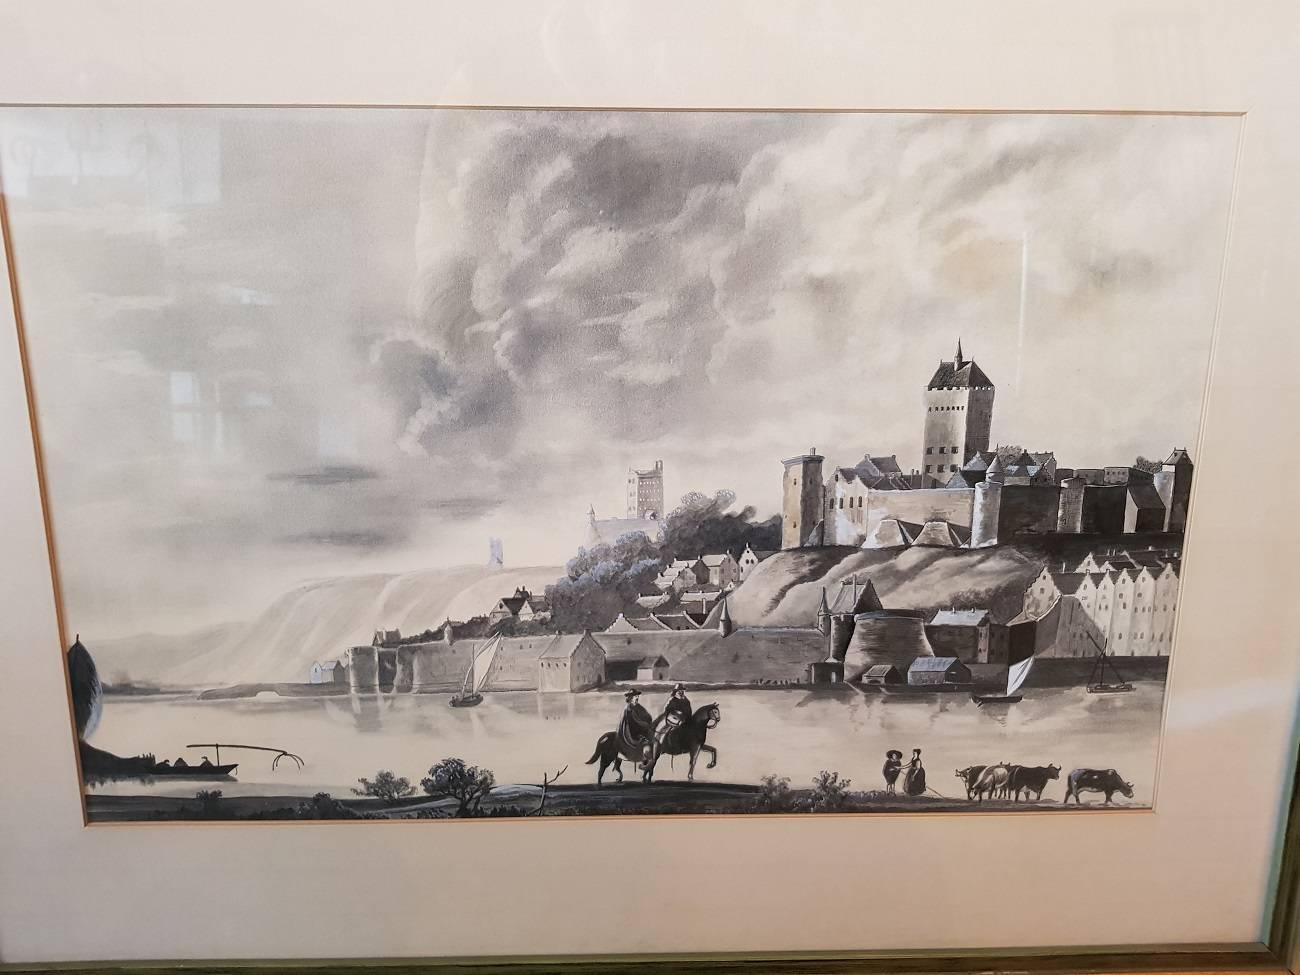 Charcoal drawing from the second half of the 20th century view of Nijmegen with the Valkhof this is believed to work by Aelbert Cuyp 17th century painter.

The measurements are incl. frame,
Depth 2 cm/ 0.7 inch.
Width 75 cm/ 29.5 inch.
Height